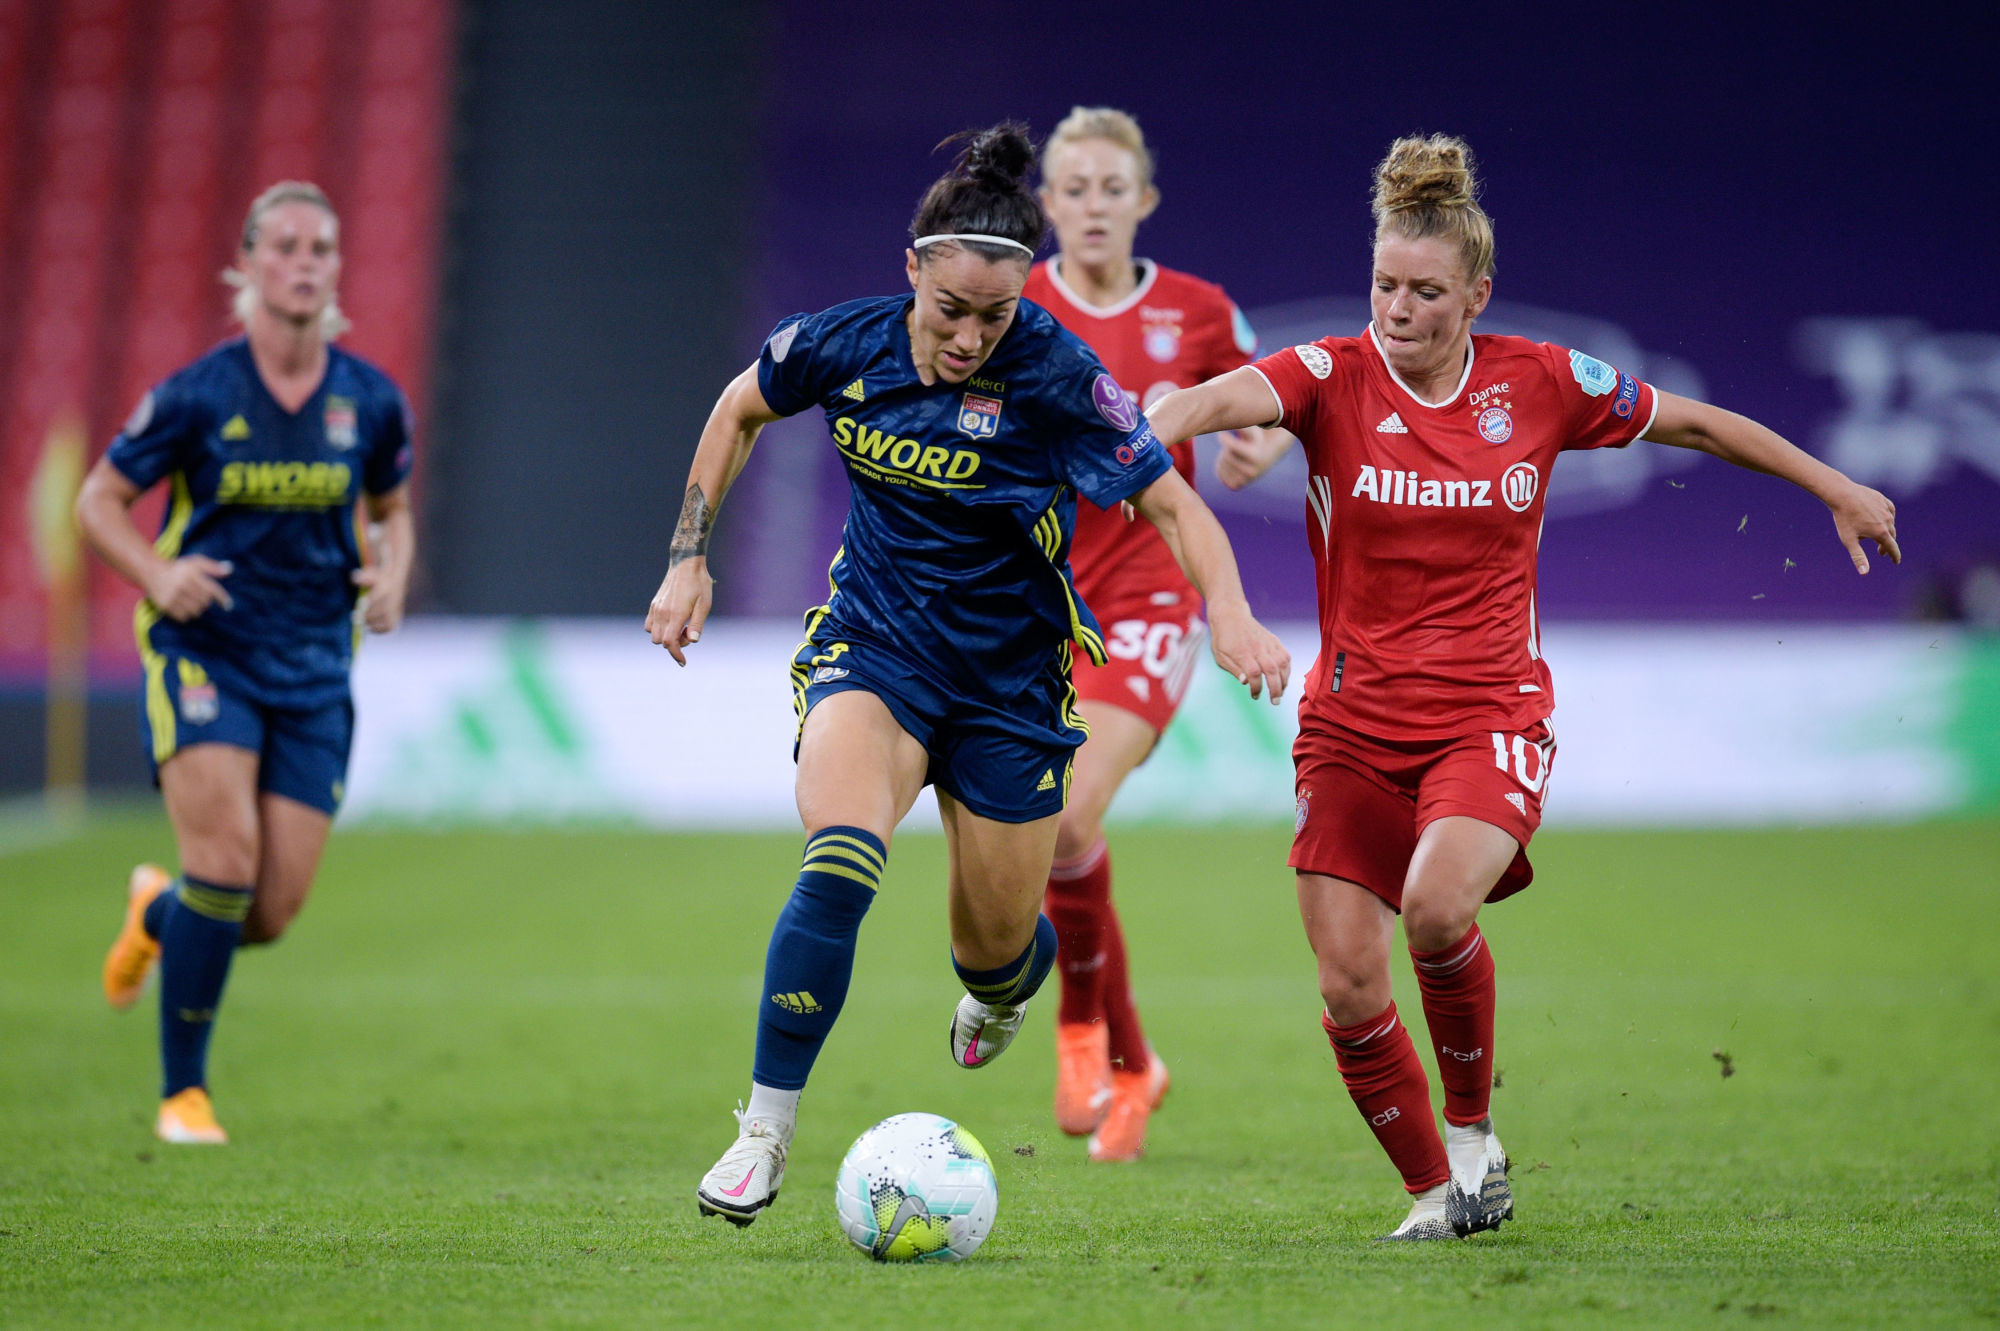 BILBAO, SPAIN - AUGUST 22: Lucy Bronze of Olympique Lyon is challenged by Linda Dallmann of FC Bayern Munich during the UEFA Women's Champions League Quarter Final match between Olympique Lyon Women and FC Bayern Muenchen Women at San Mames Stadium on August 22, 2020 in Bilbao, Spain. (Photo by Juanma - UEFA/UEFA via Getty Images) 


Photo by Icon Sport - Estadio de San Mames - Bilbao (Espagne)